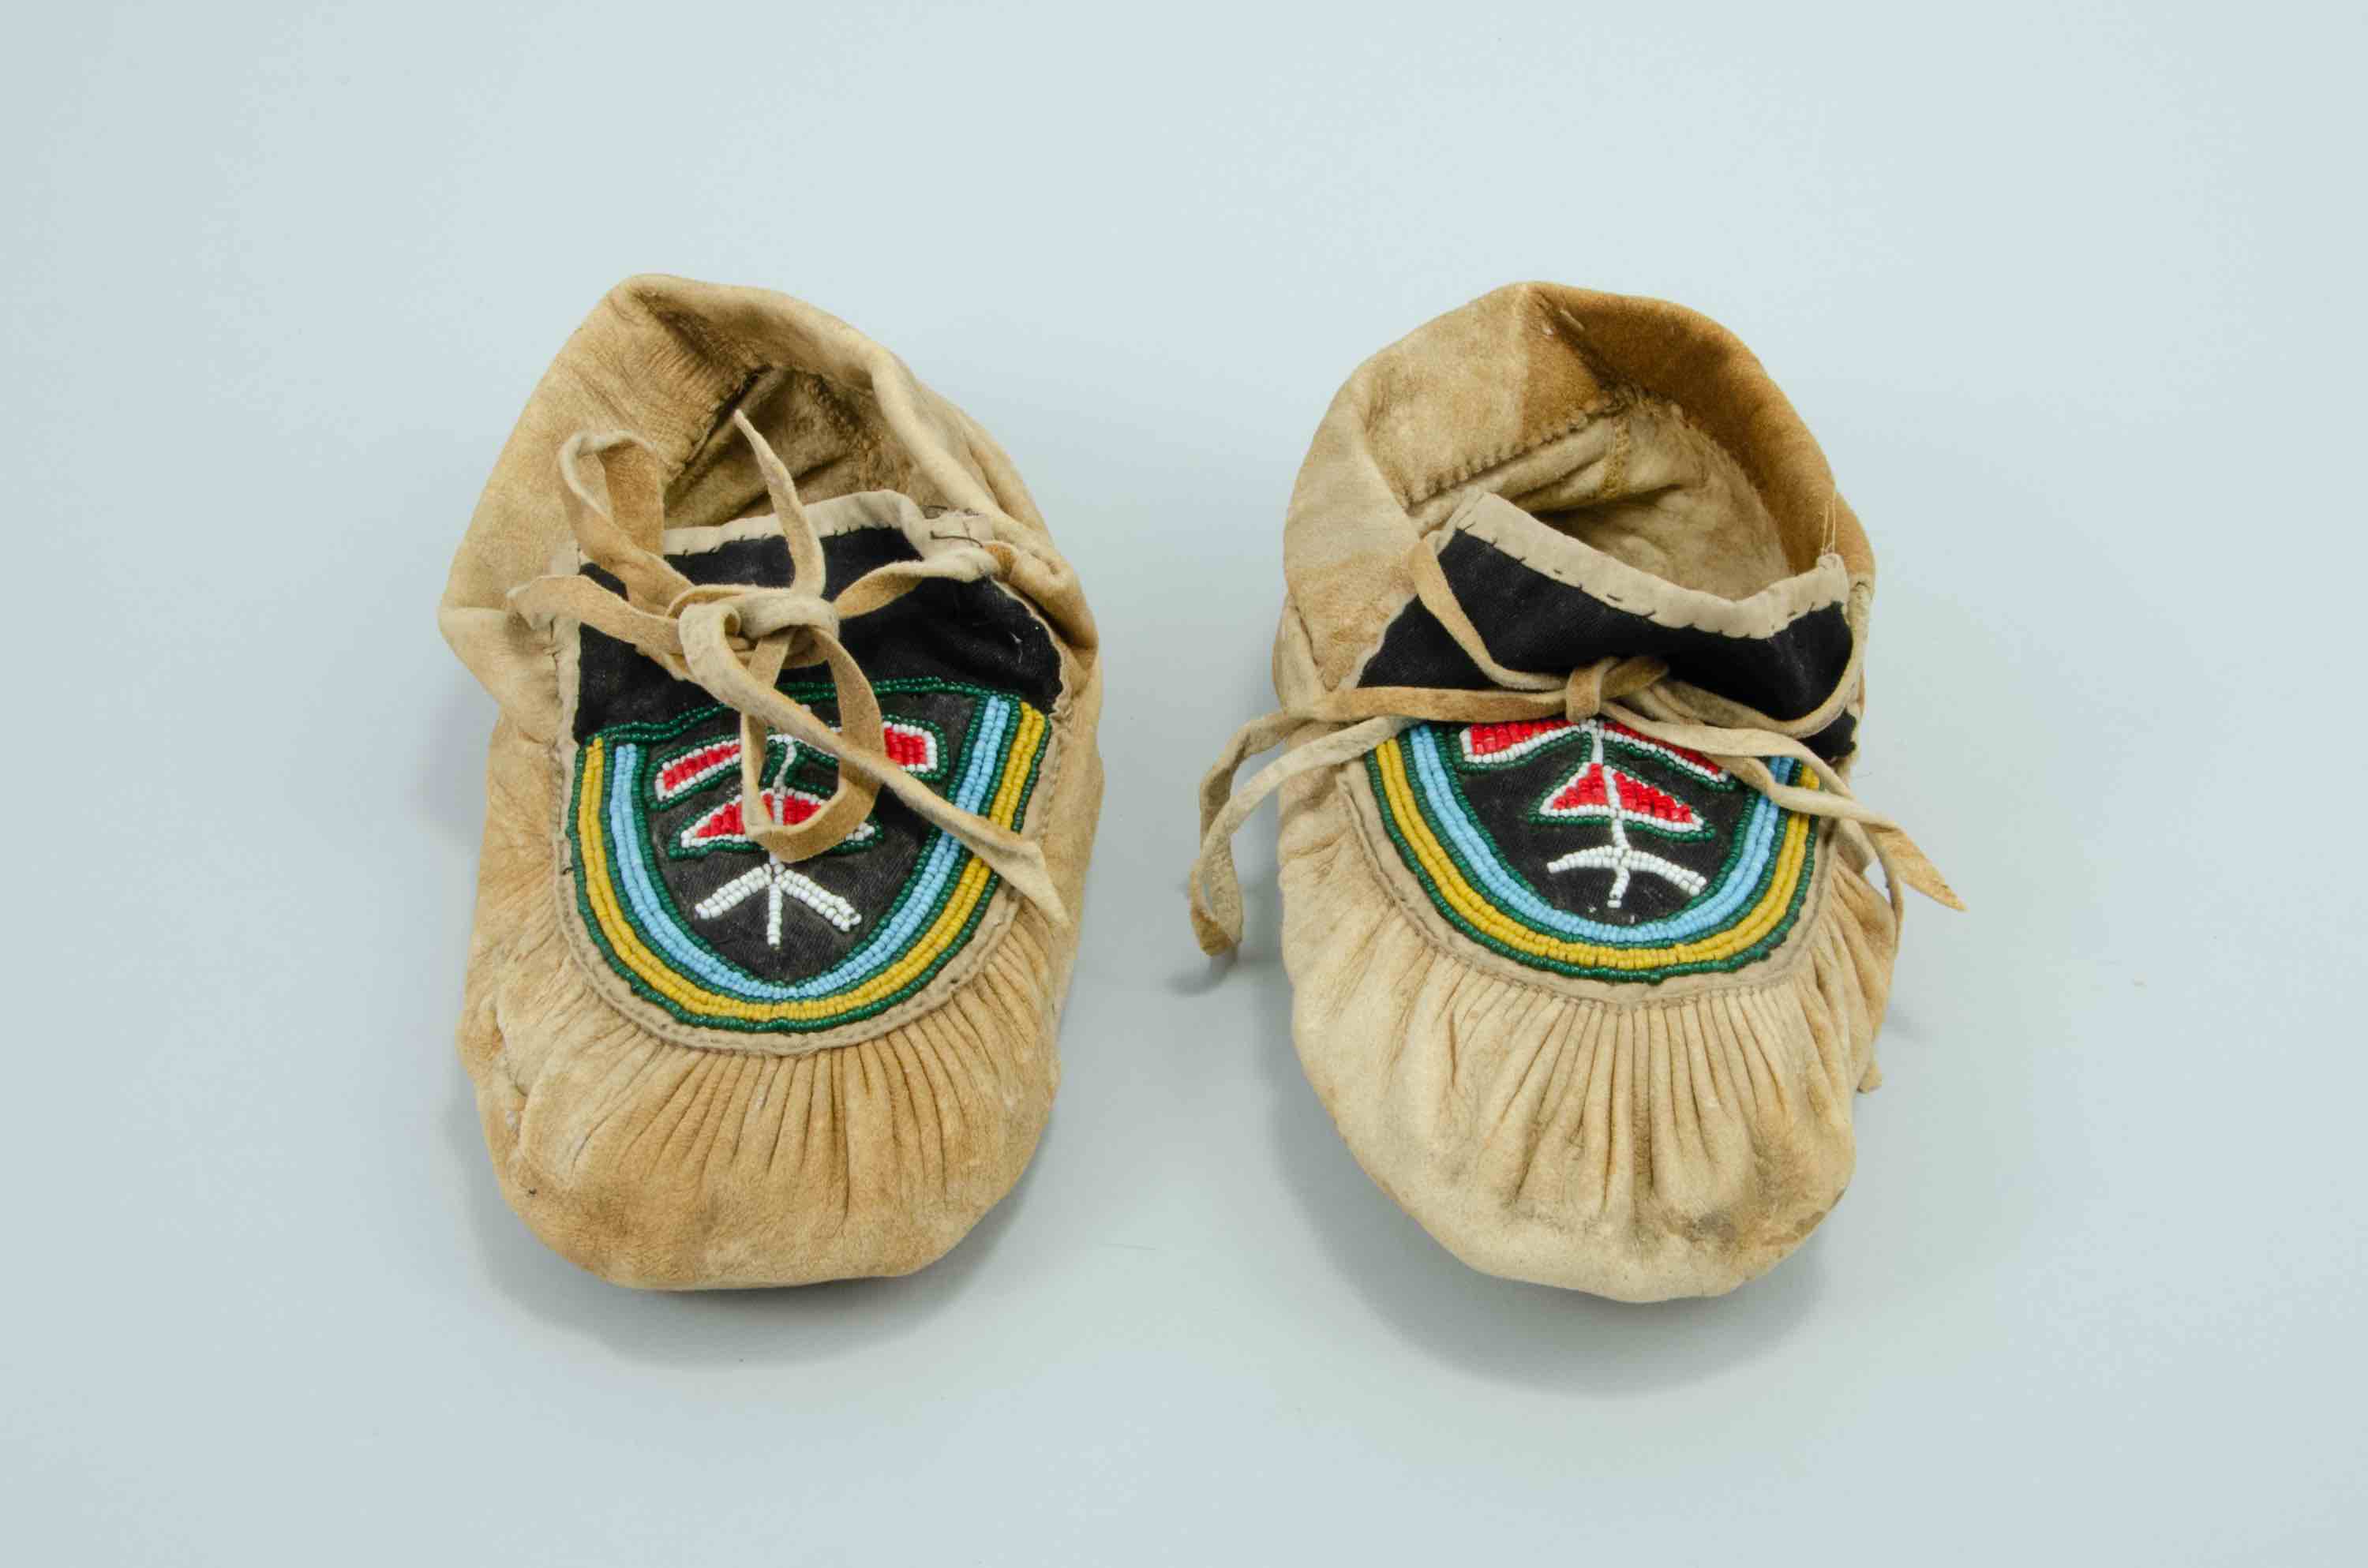 Moccasins from Labrador